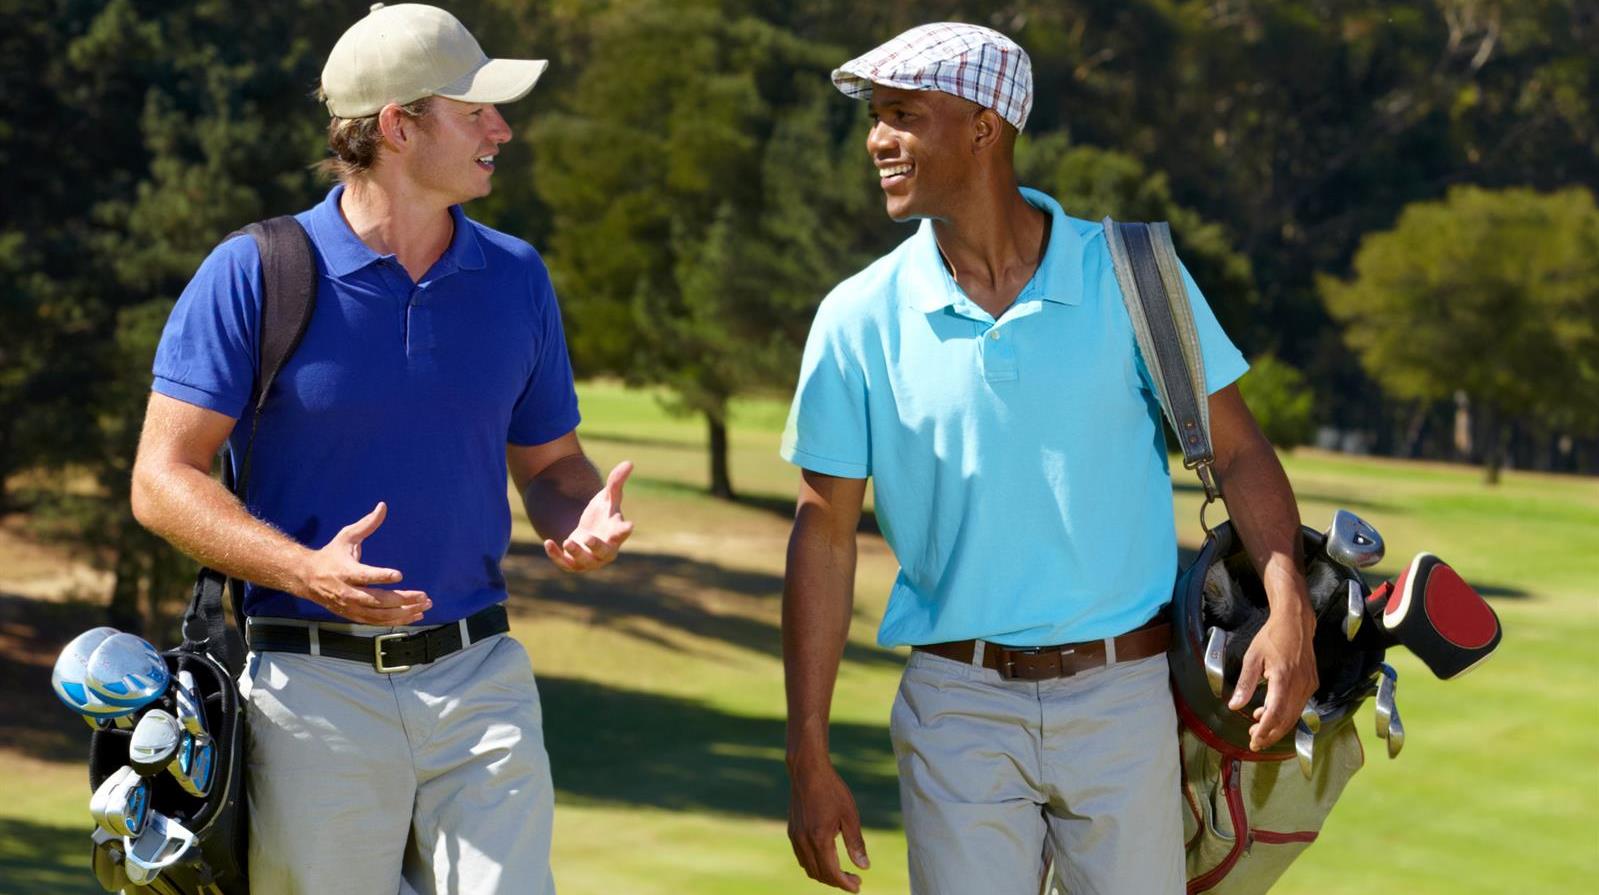 discussing-handicaps-shot-two-friends-talkin-their-way-teeoff